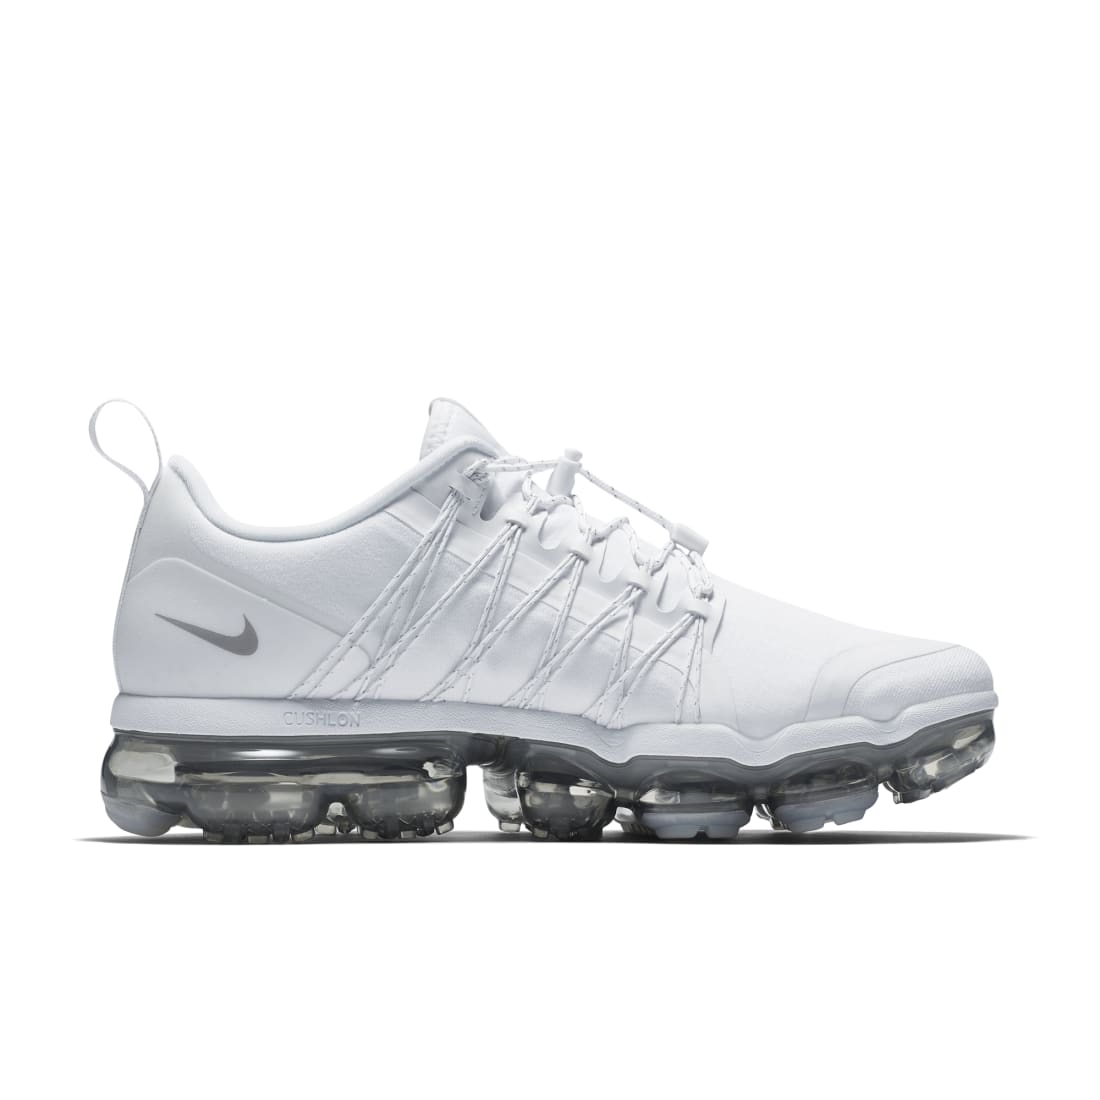 Nike Air Vapormax Run Utility White Sale Online, UP TO 55% OFF